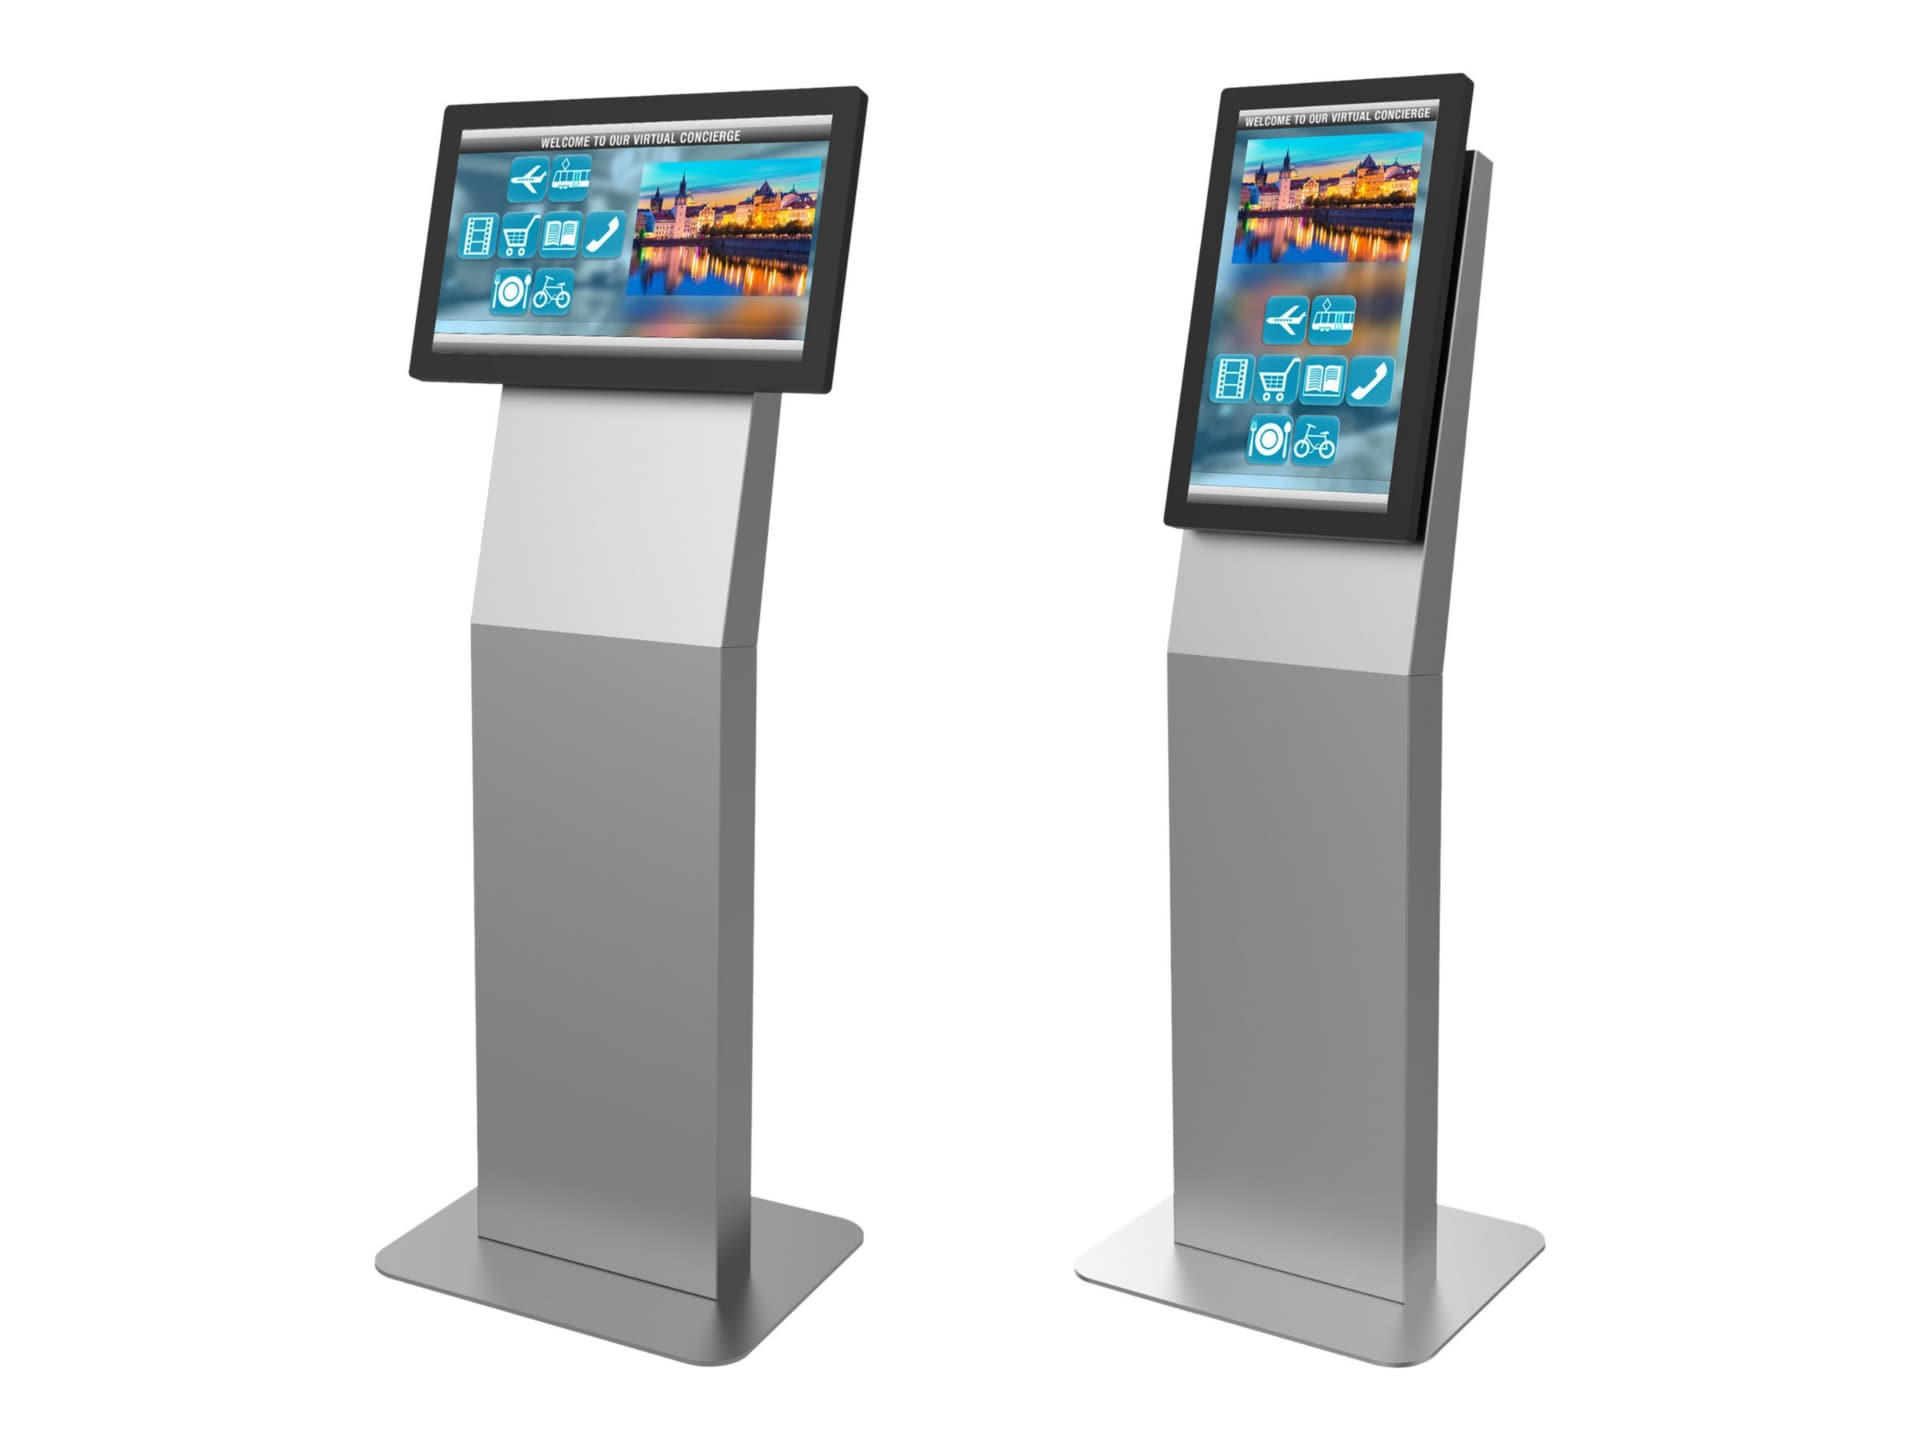 Peerless-AV KIP522-S - stand - for LCD display / accessories - truillusion silver - TAA Compliant